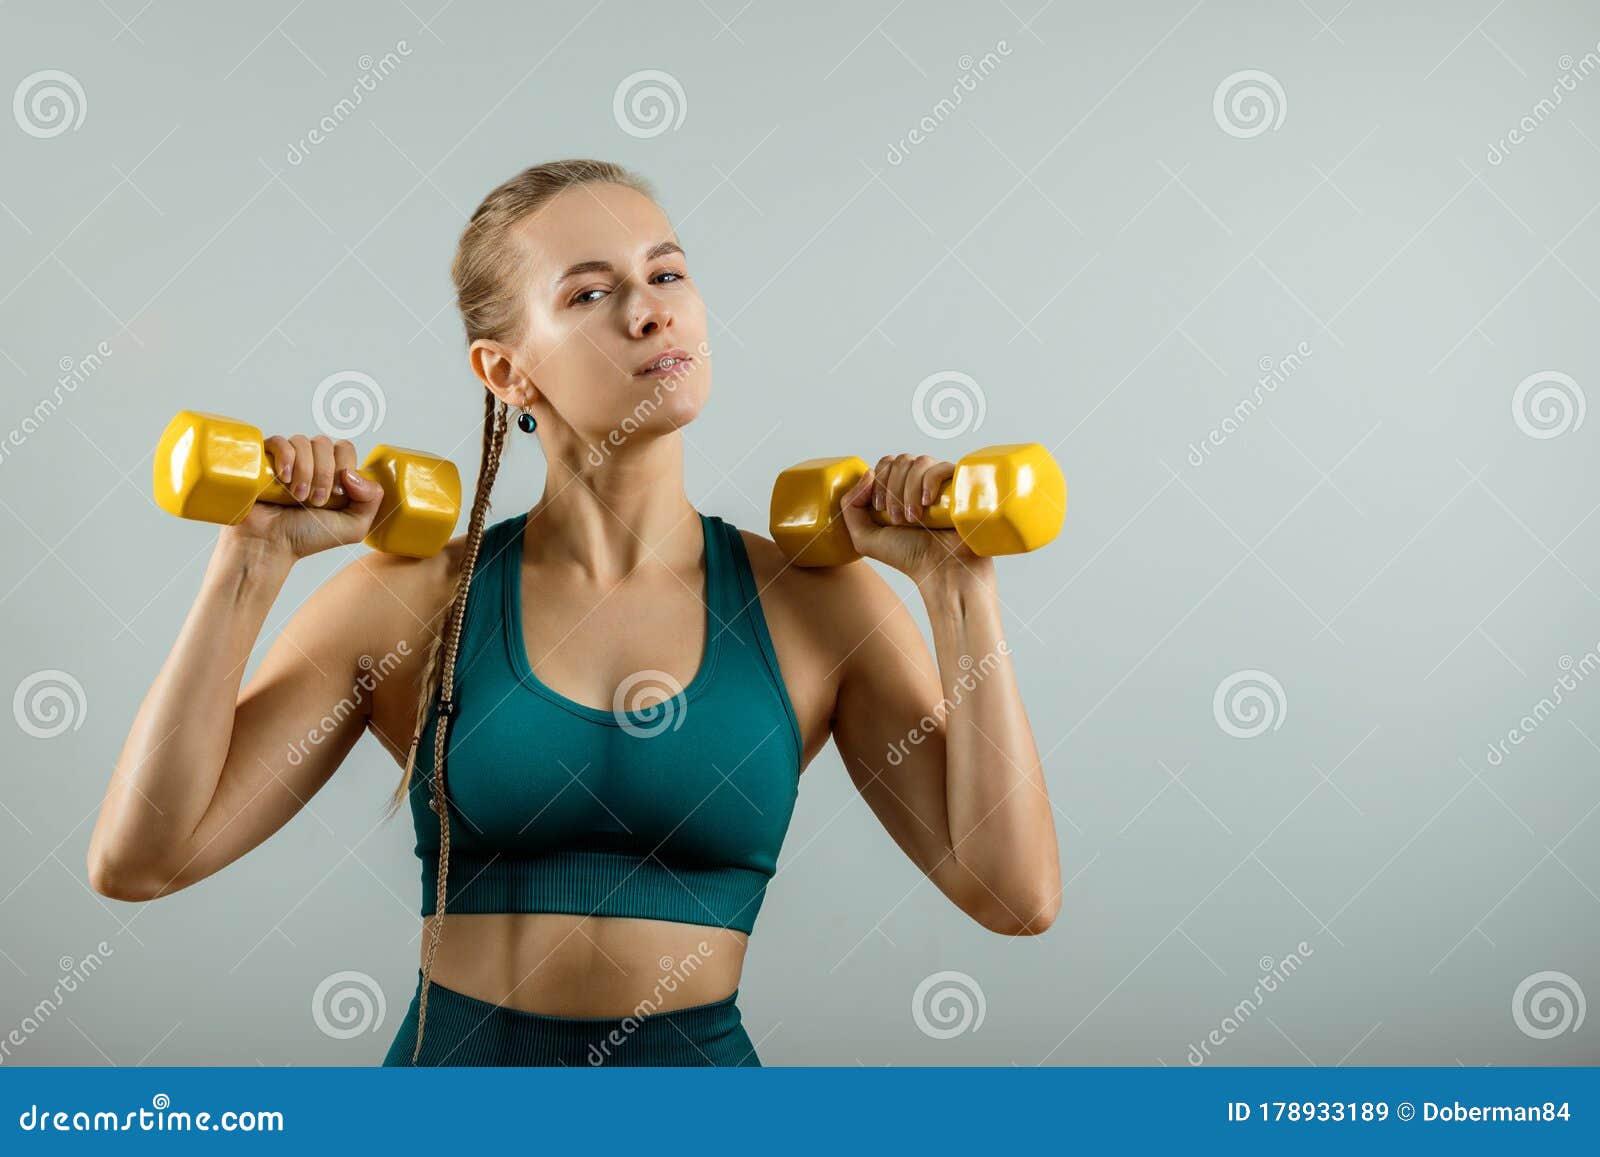 Athletic Woman With Dumbbells In Hands On A Gray Background Fitness Banner Fitness Motivation Photo Of A Muscular Stock Image Image Of Athletic Female